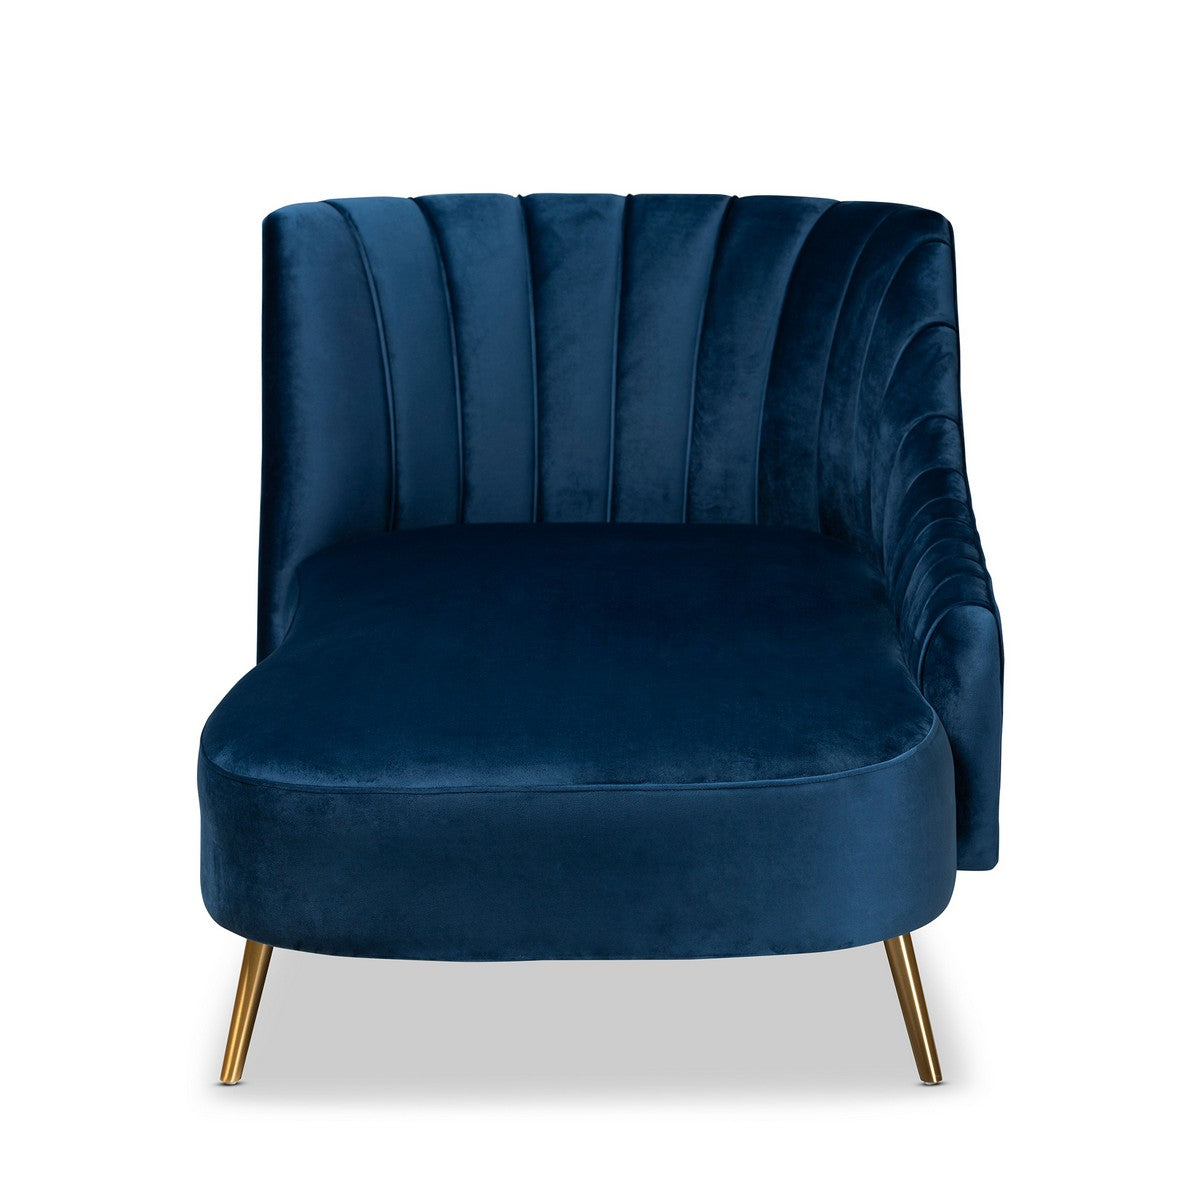 Baxton Studio Kailyn Glam and Luxe Navy Blue Velvet Fabric Upholstered and Gold Finished Chaise